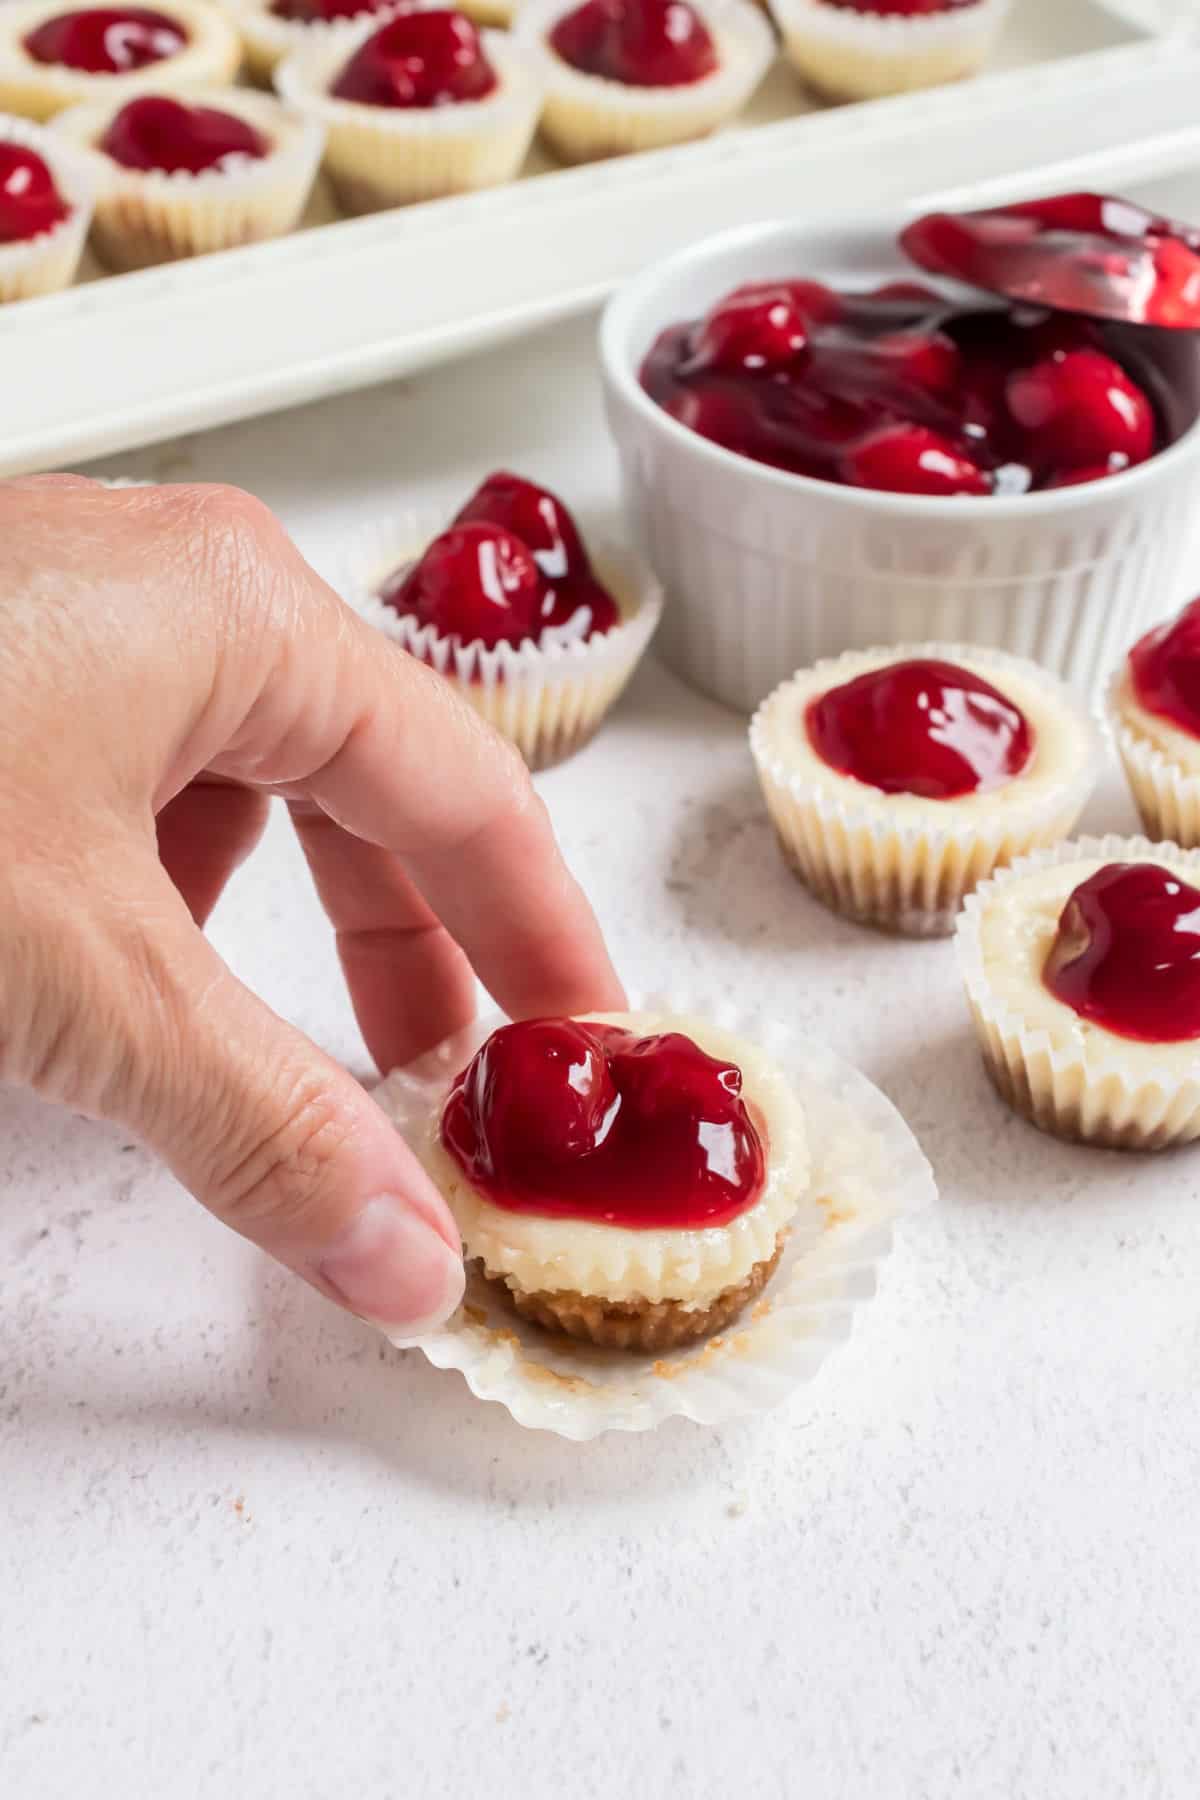 Mini cherry cheesecake unwrapped and being picked up.